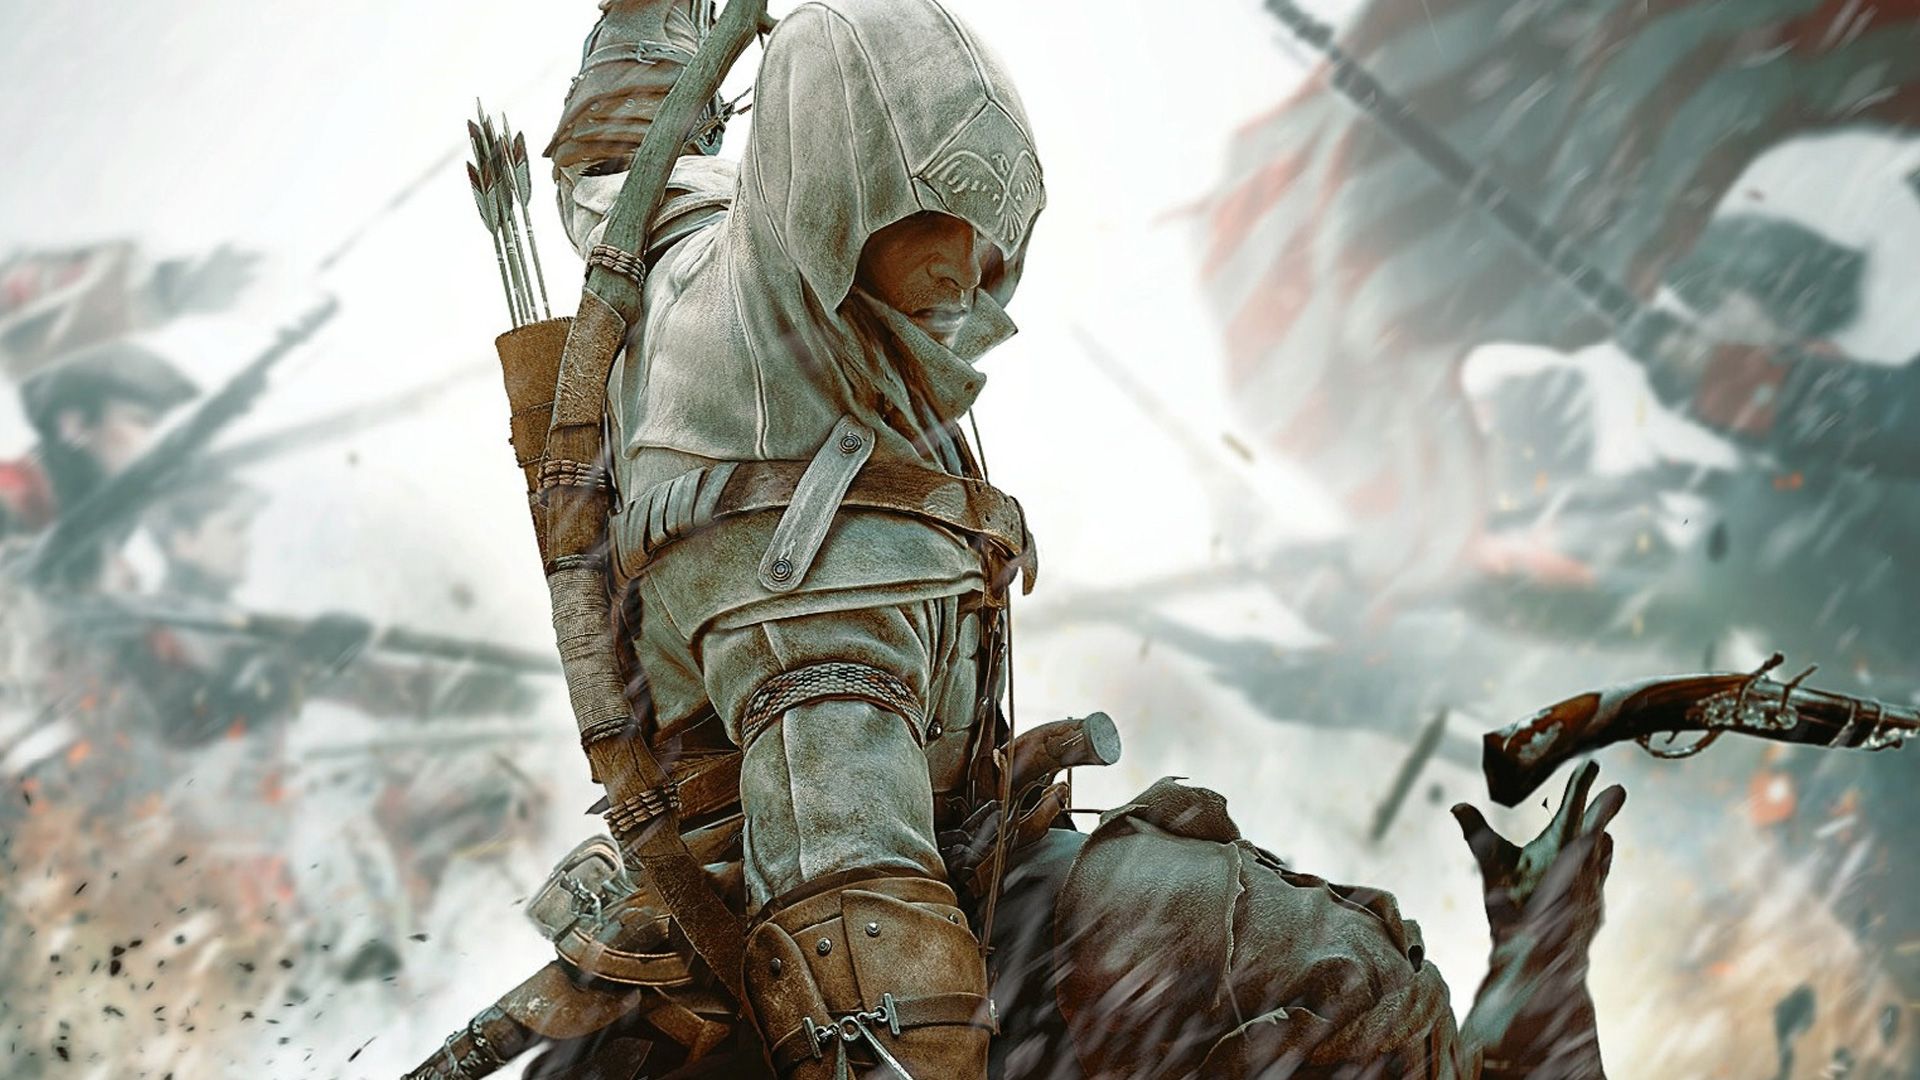 Assassin's Creed III: Liberation HD Wallpaper. Background